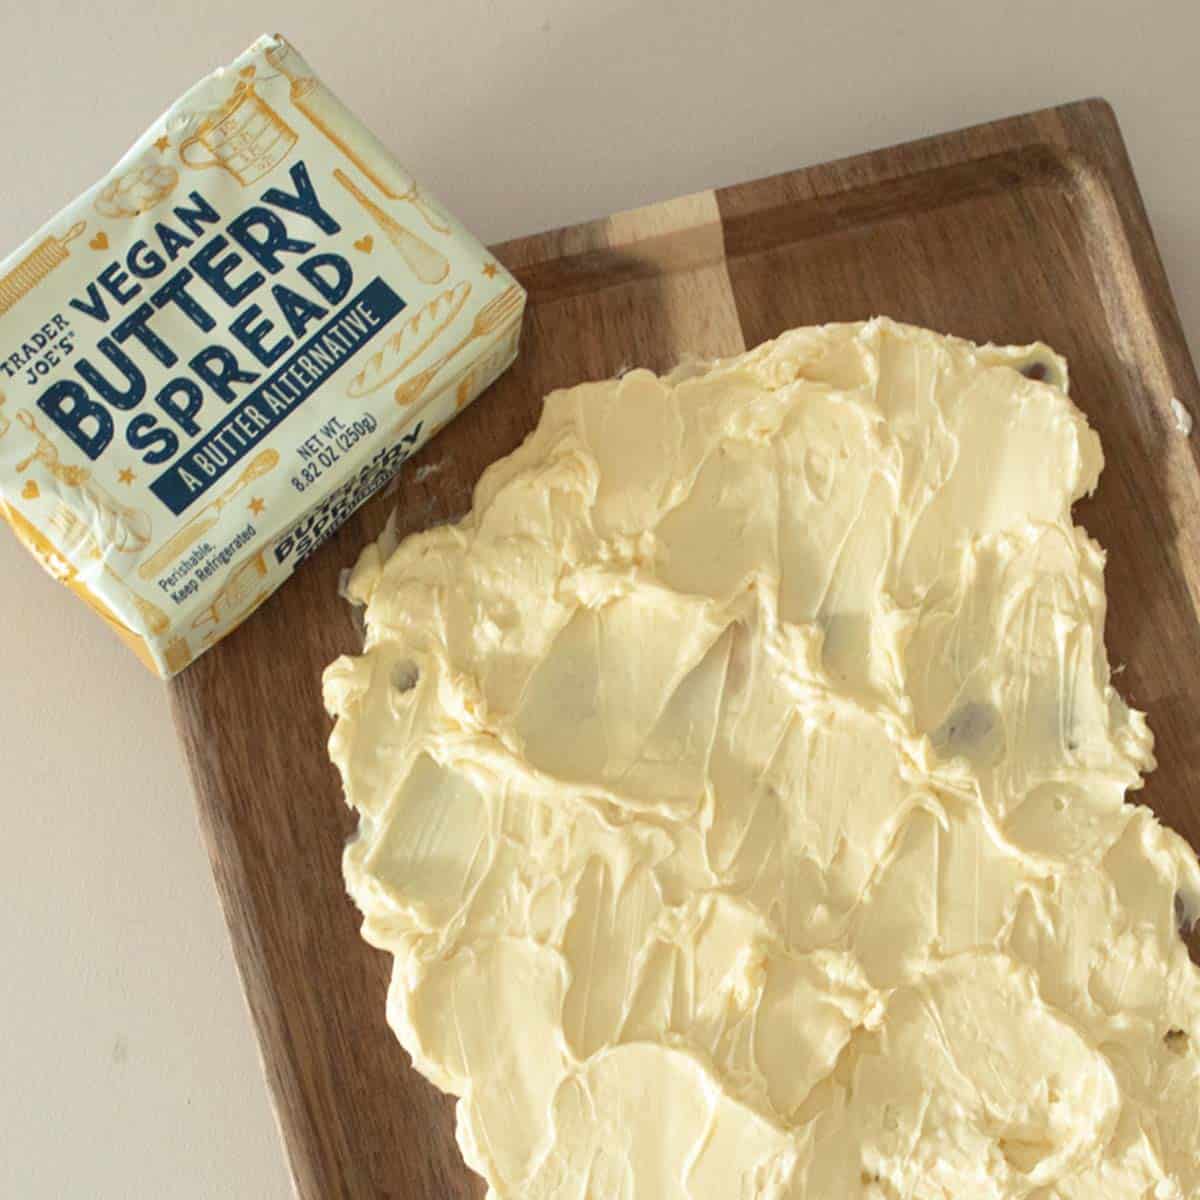 vegan butter from trader joes spread on a board